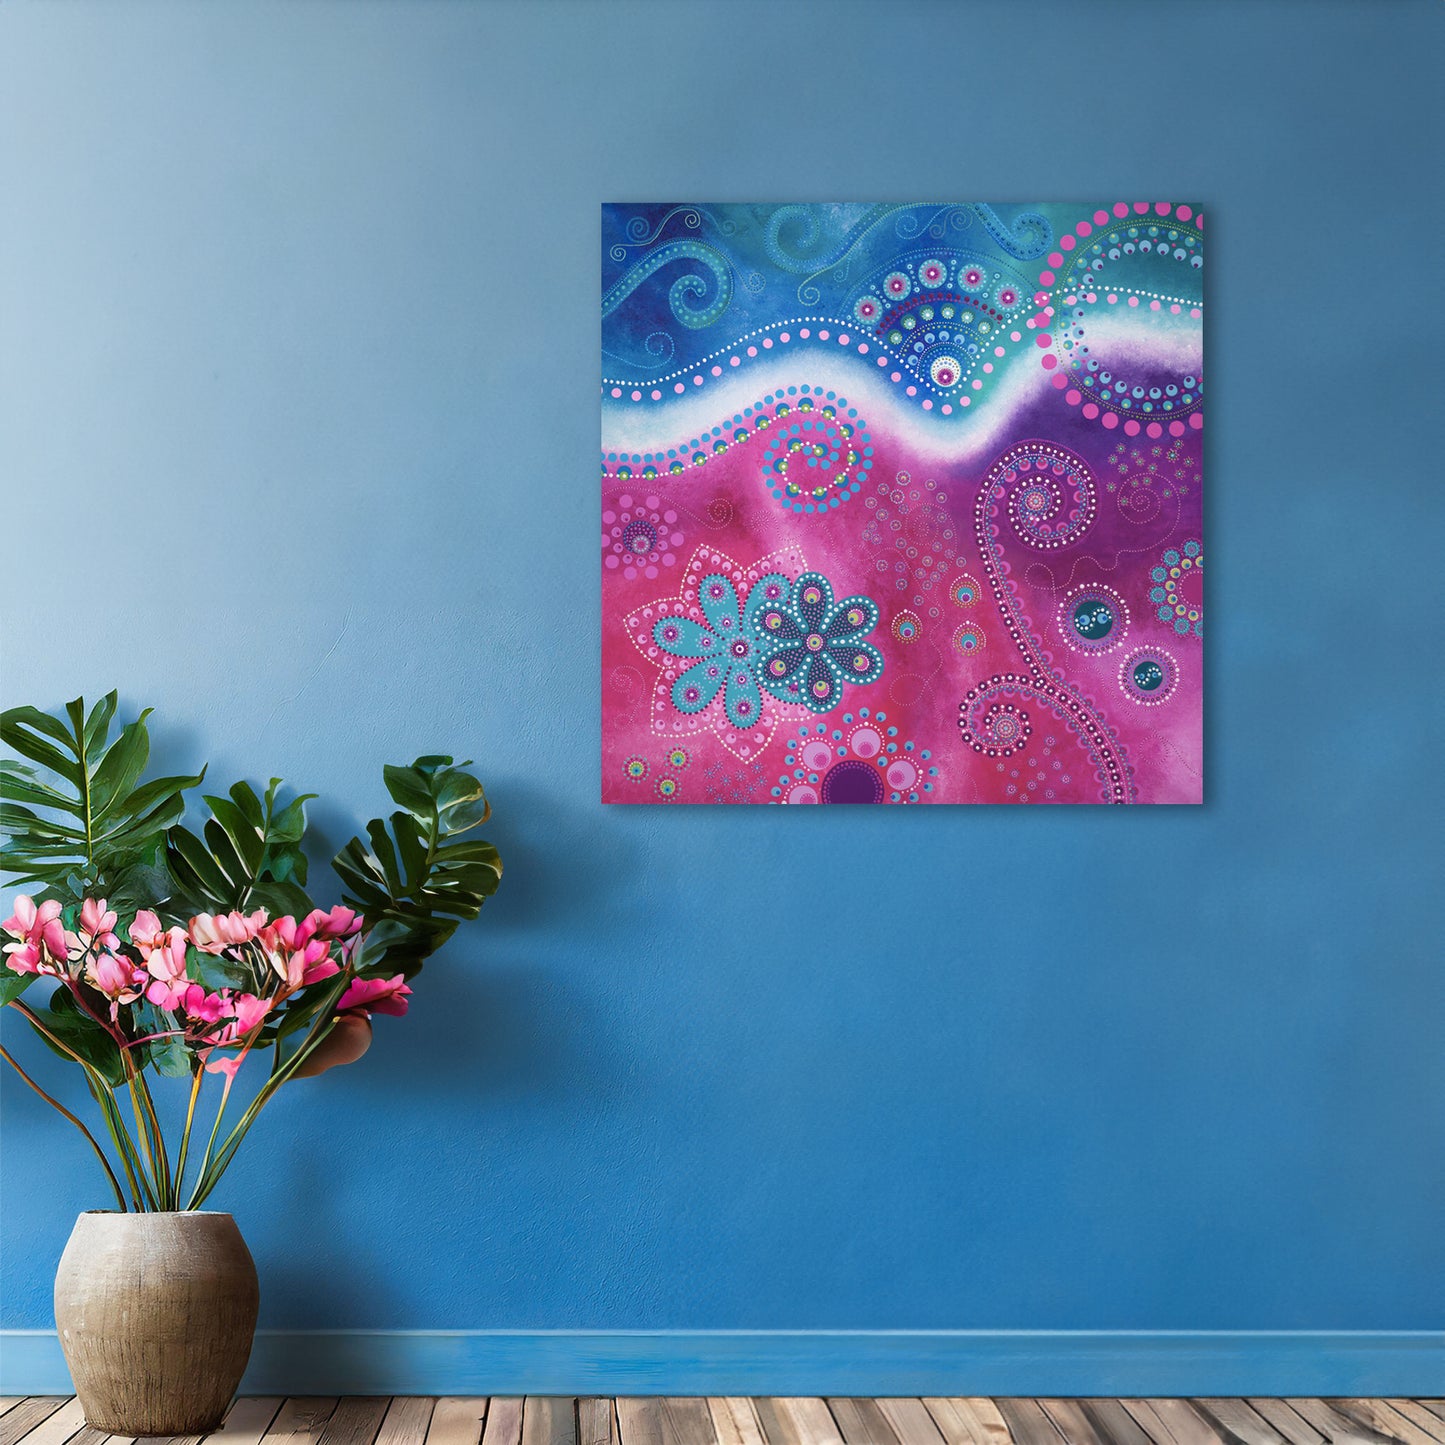 "The Happiness inside" - Blue and pink (original colour) - by Fanny Fay Engström